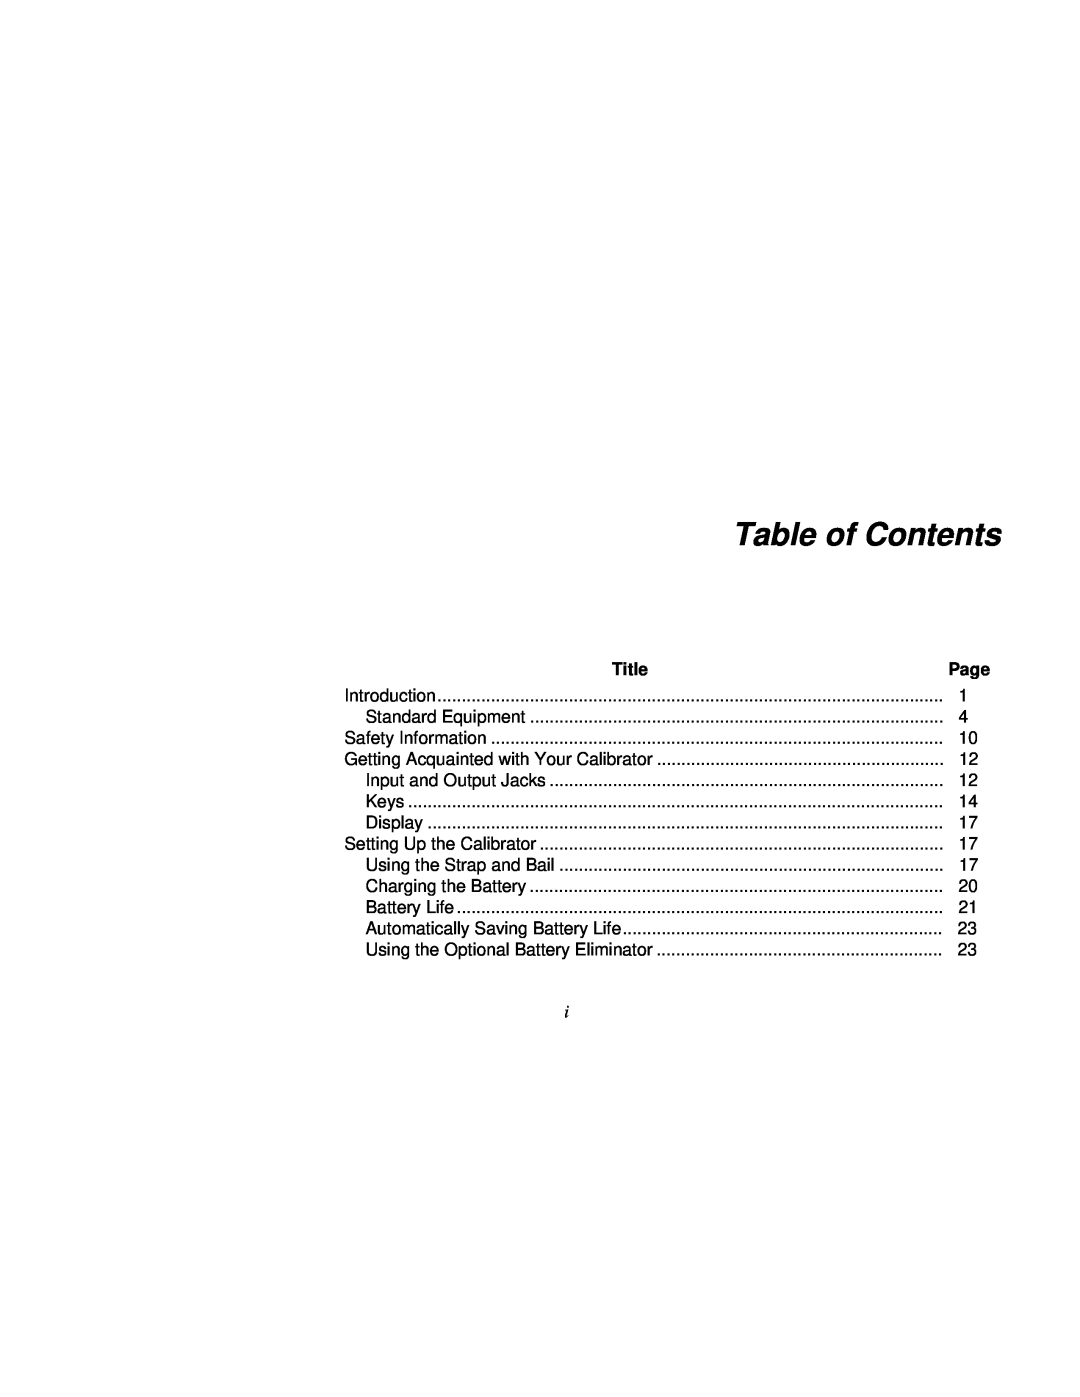 Fluke Rev. 4 user manual Table of Contents, Title 